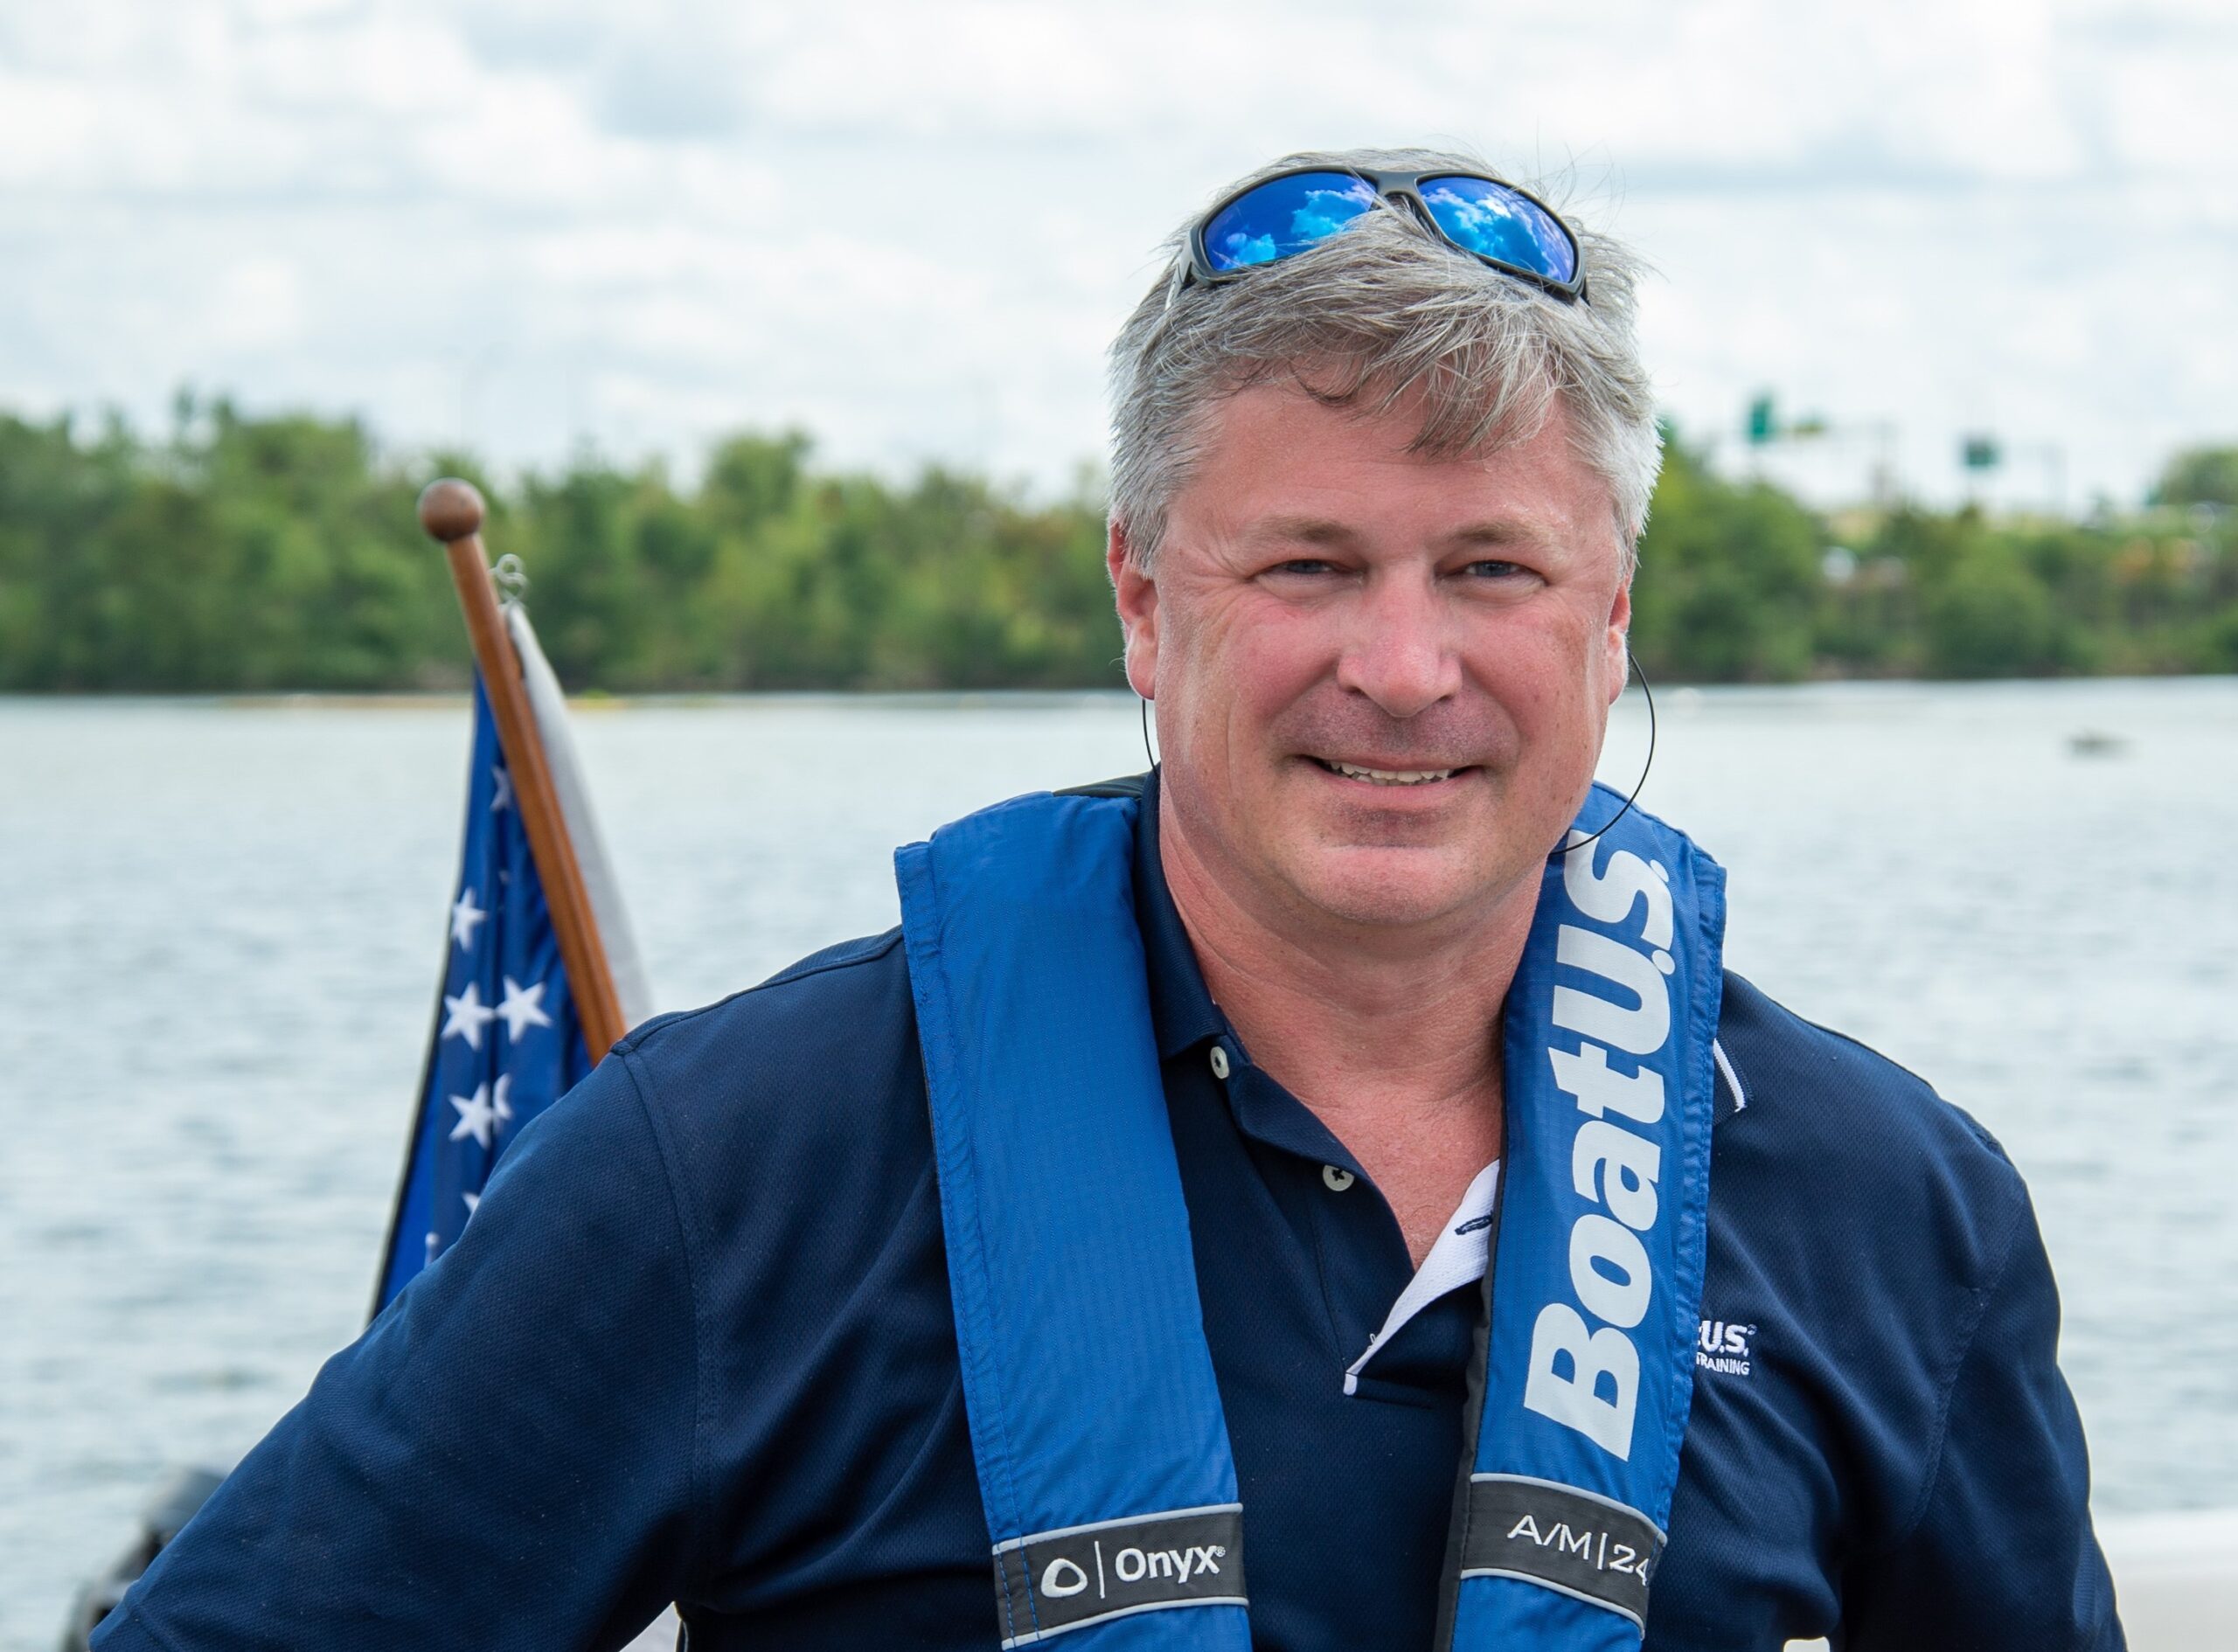 BoatUS president named to Boating Safety Hall of Fame